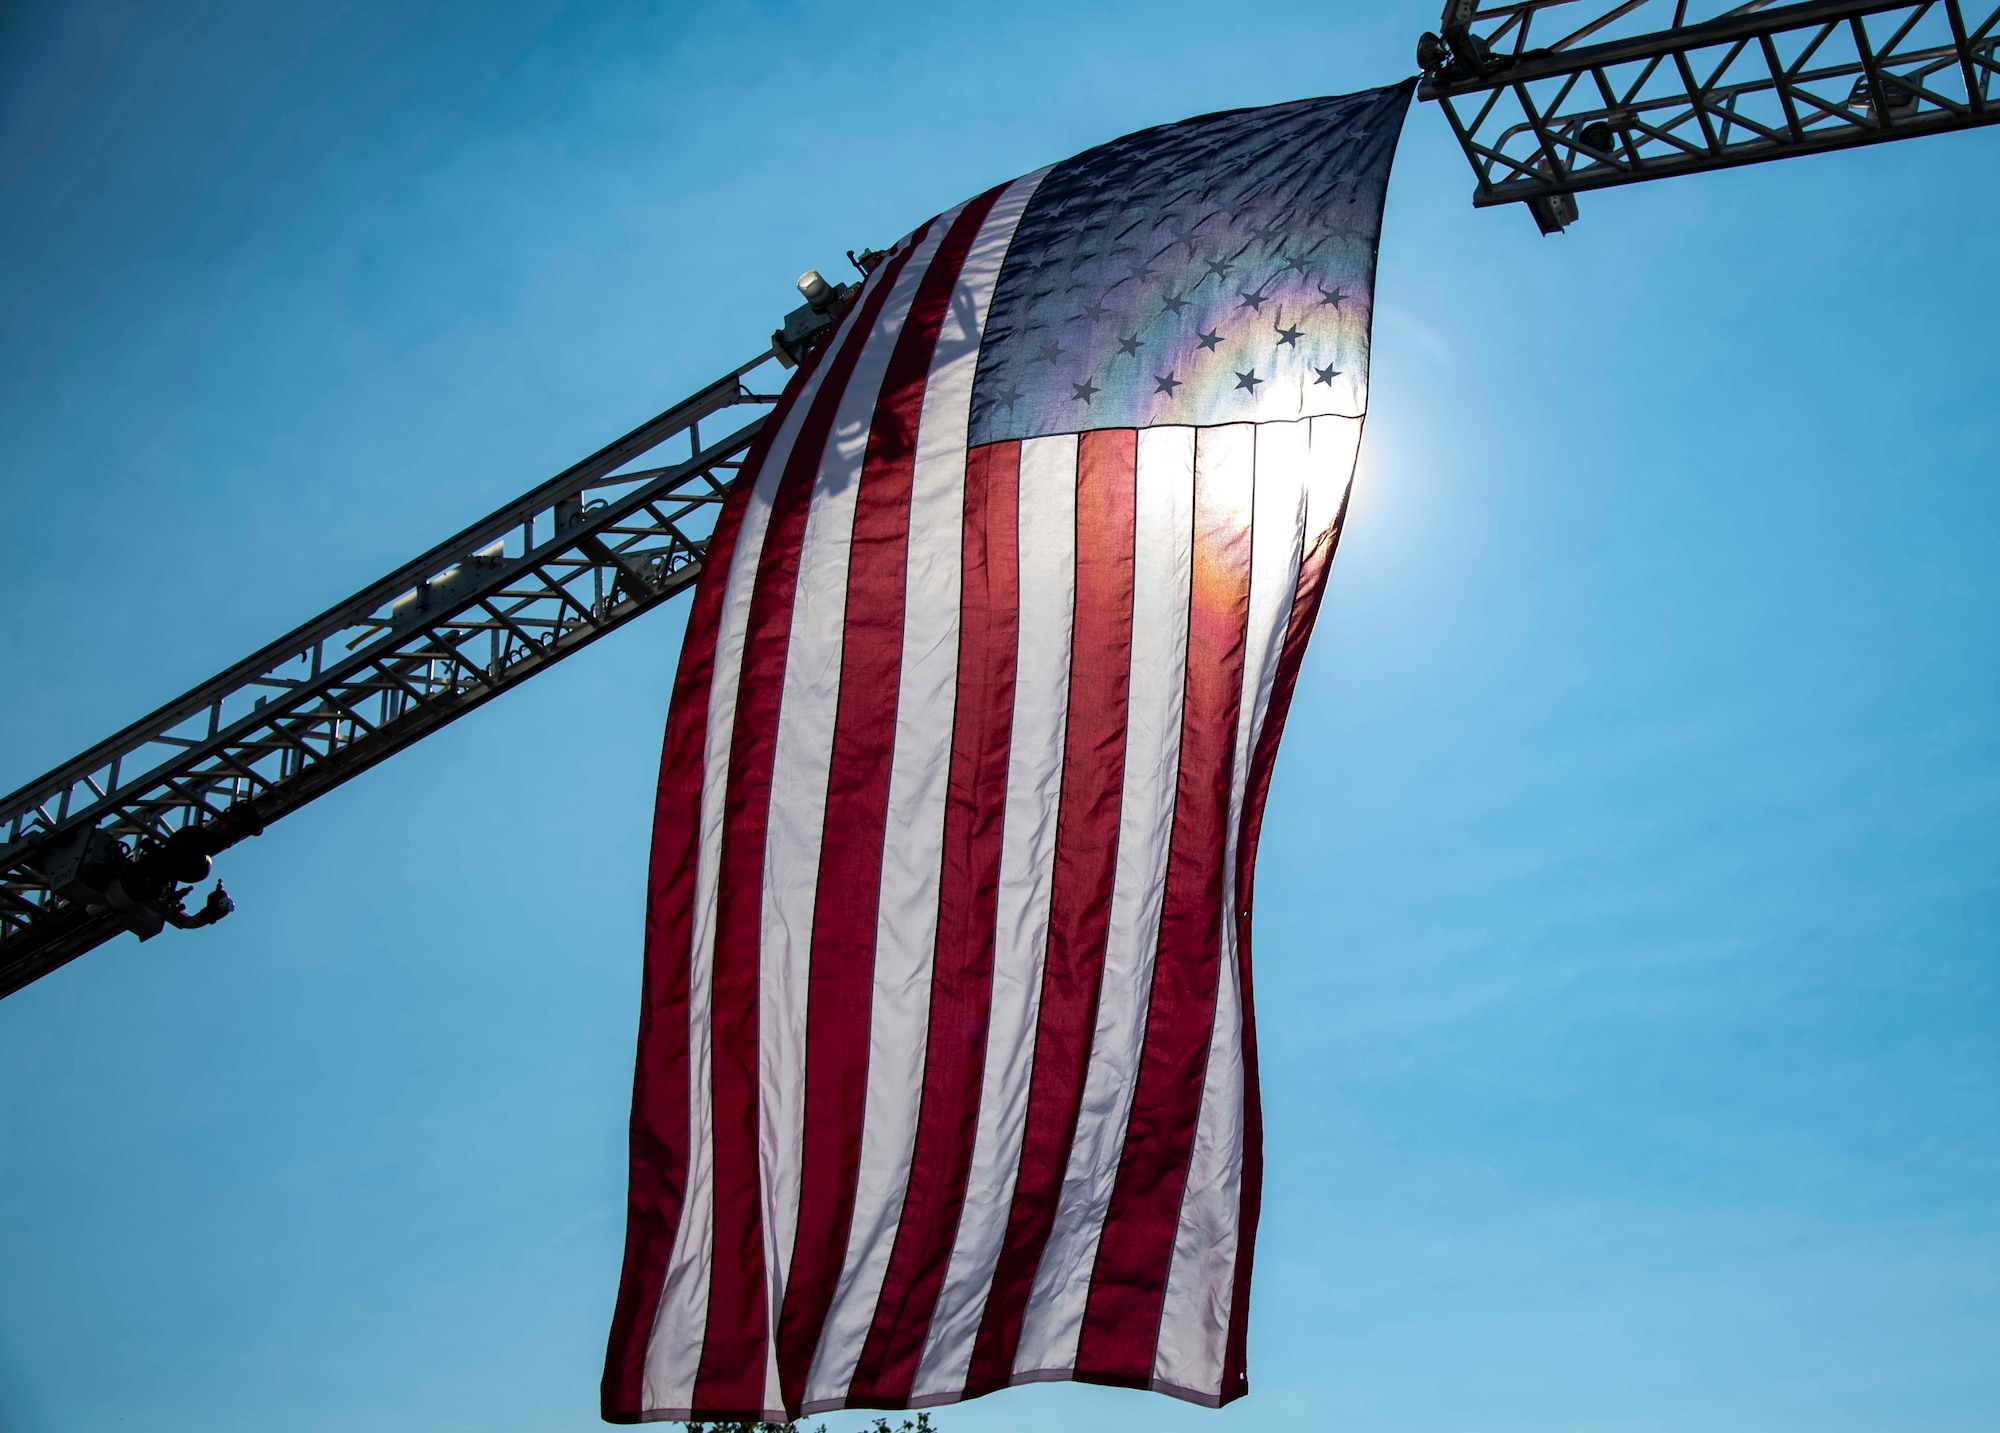 An American flag waves during the 20th Anniversary 9/11 Remembrance Ceremony held at the Air Mobility Command Museum’s 9/11 Memorial on Dover Air Force Base, Delaware, Sept. 11, 2021. The base hosted the ceremony to remember and honor those who perished in the attacks on Sept. 11, 2001. (U.S. Air Force photo by Senior Airman Stephani Barge)